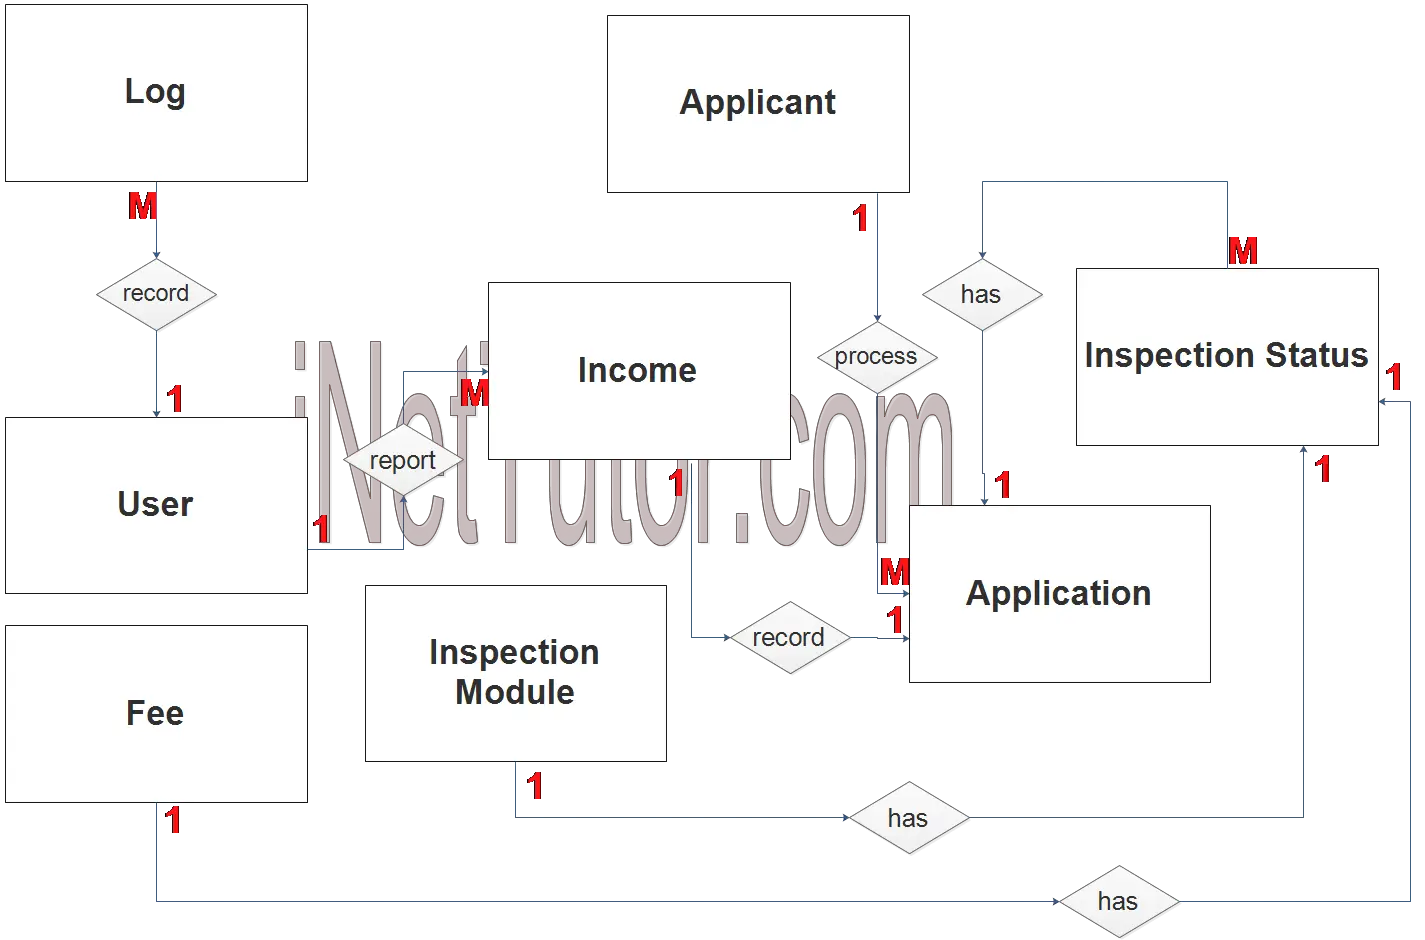 Fire Safety Inspection Certificate System ER Diagram - Step 2 Table Relationship